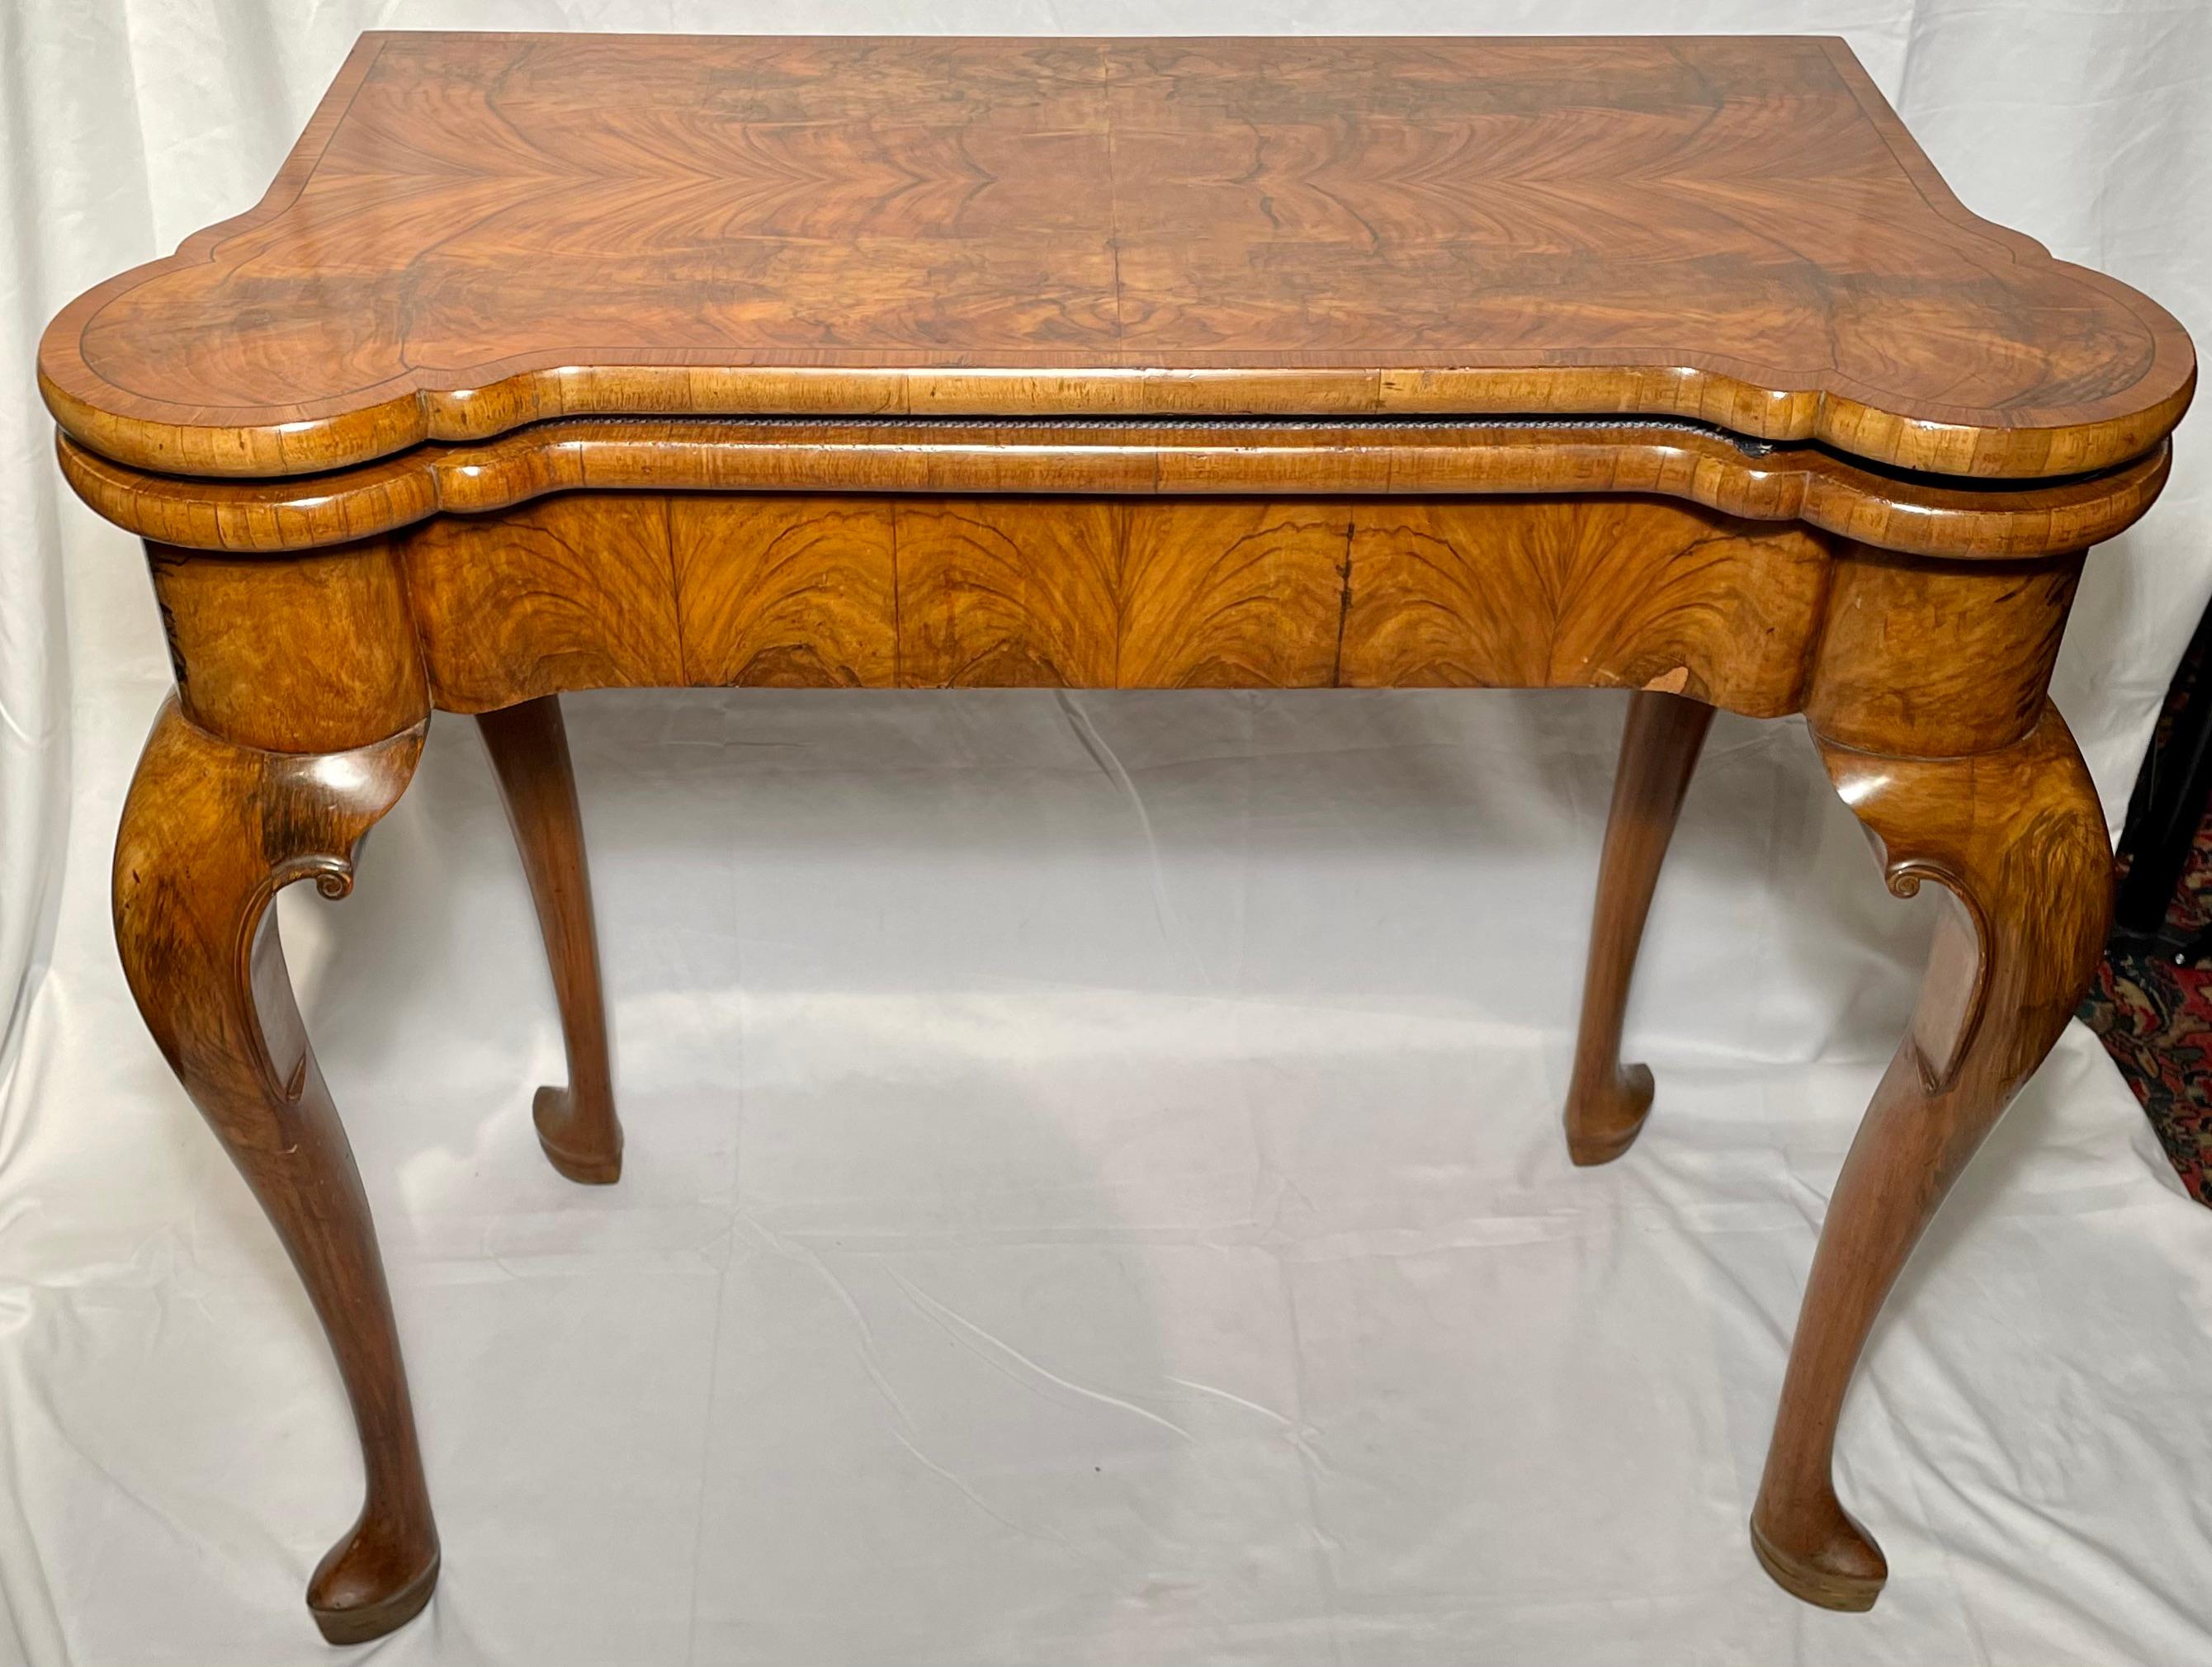 Antique 19th Century English Queen Anne Burled Walnut Console and Card Table In Good Condition For Sale In New Orleans, LA